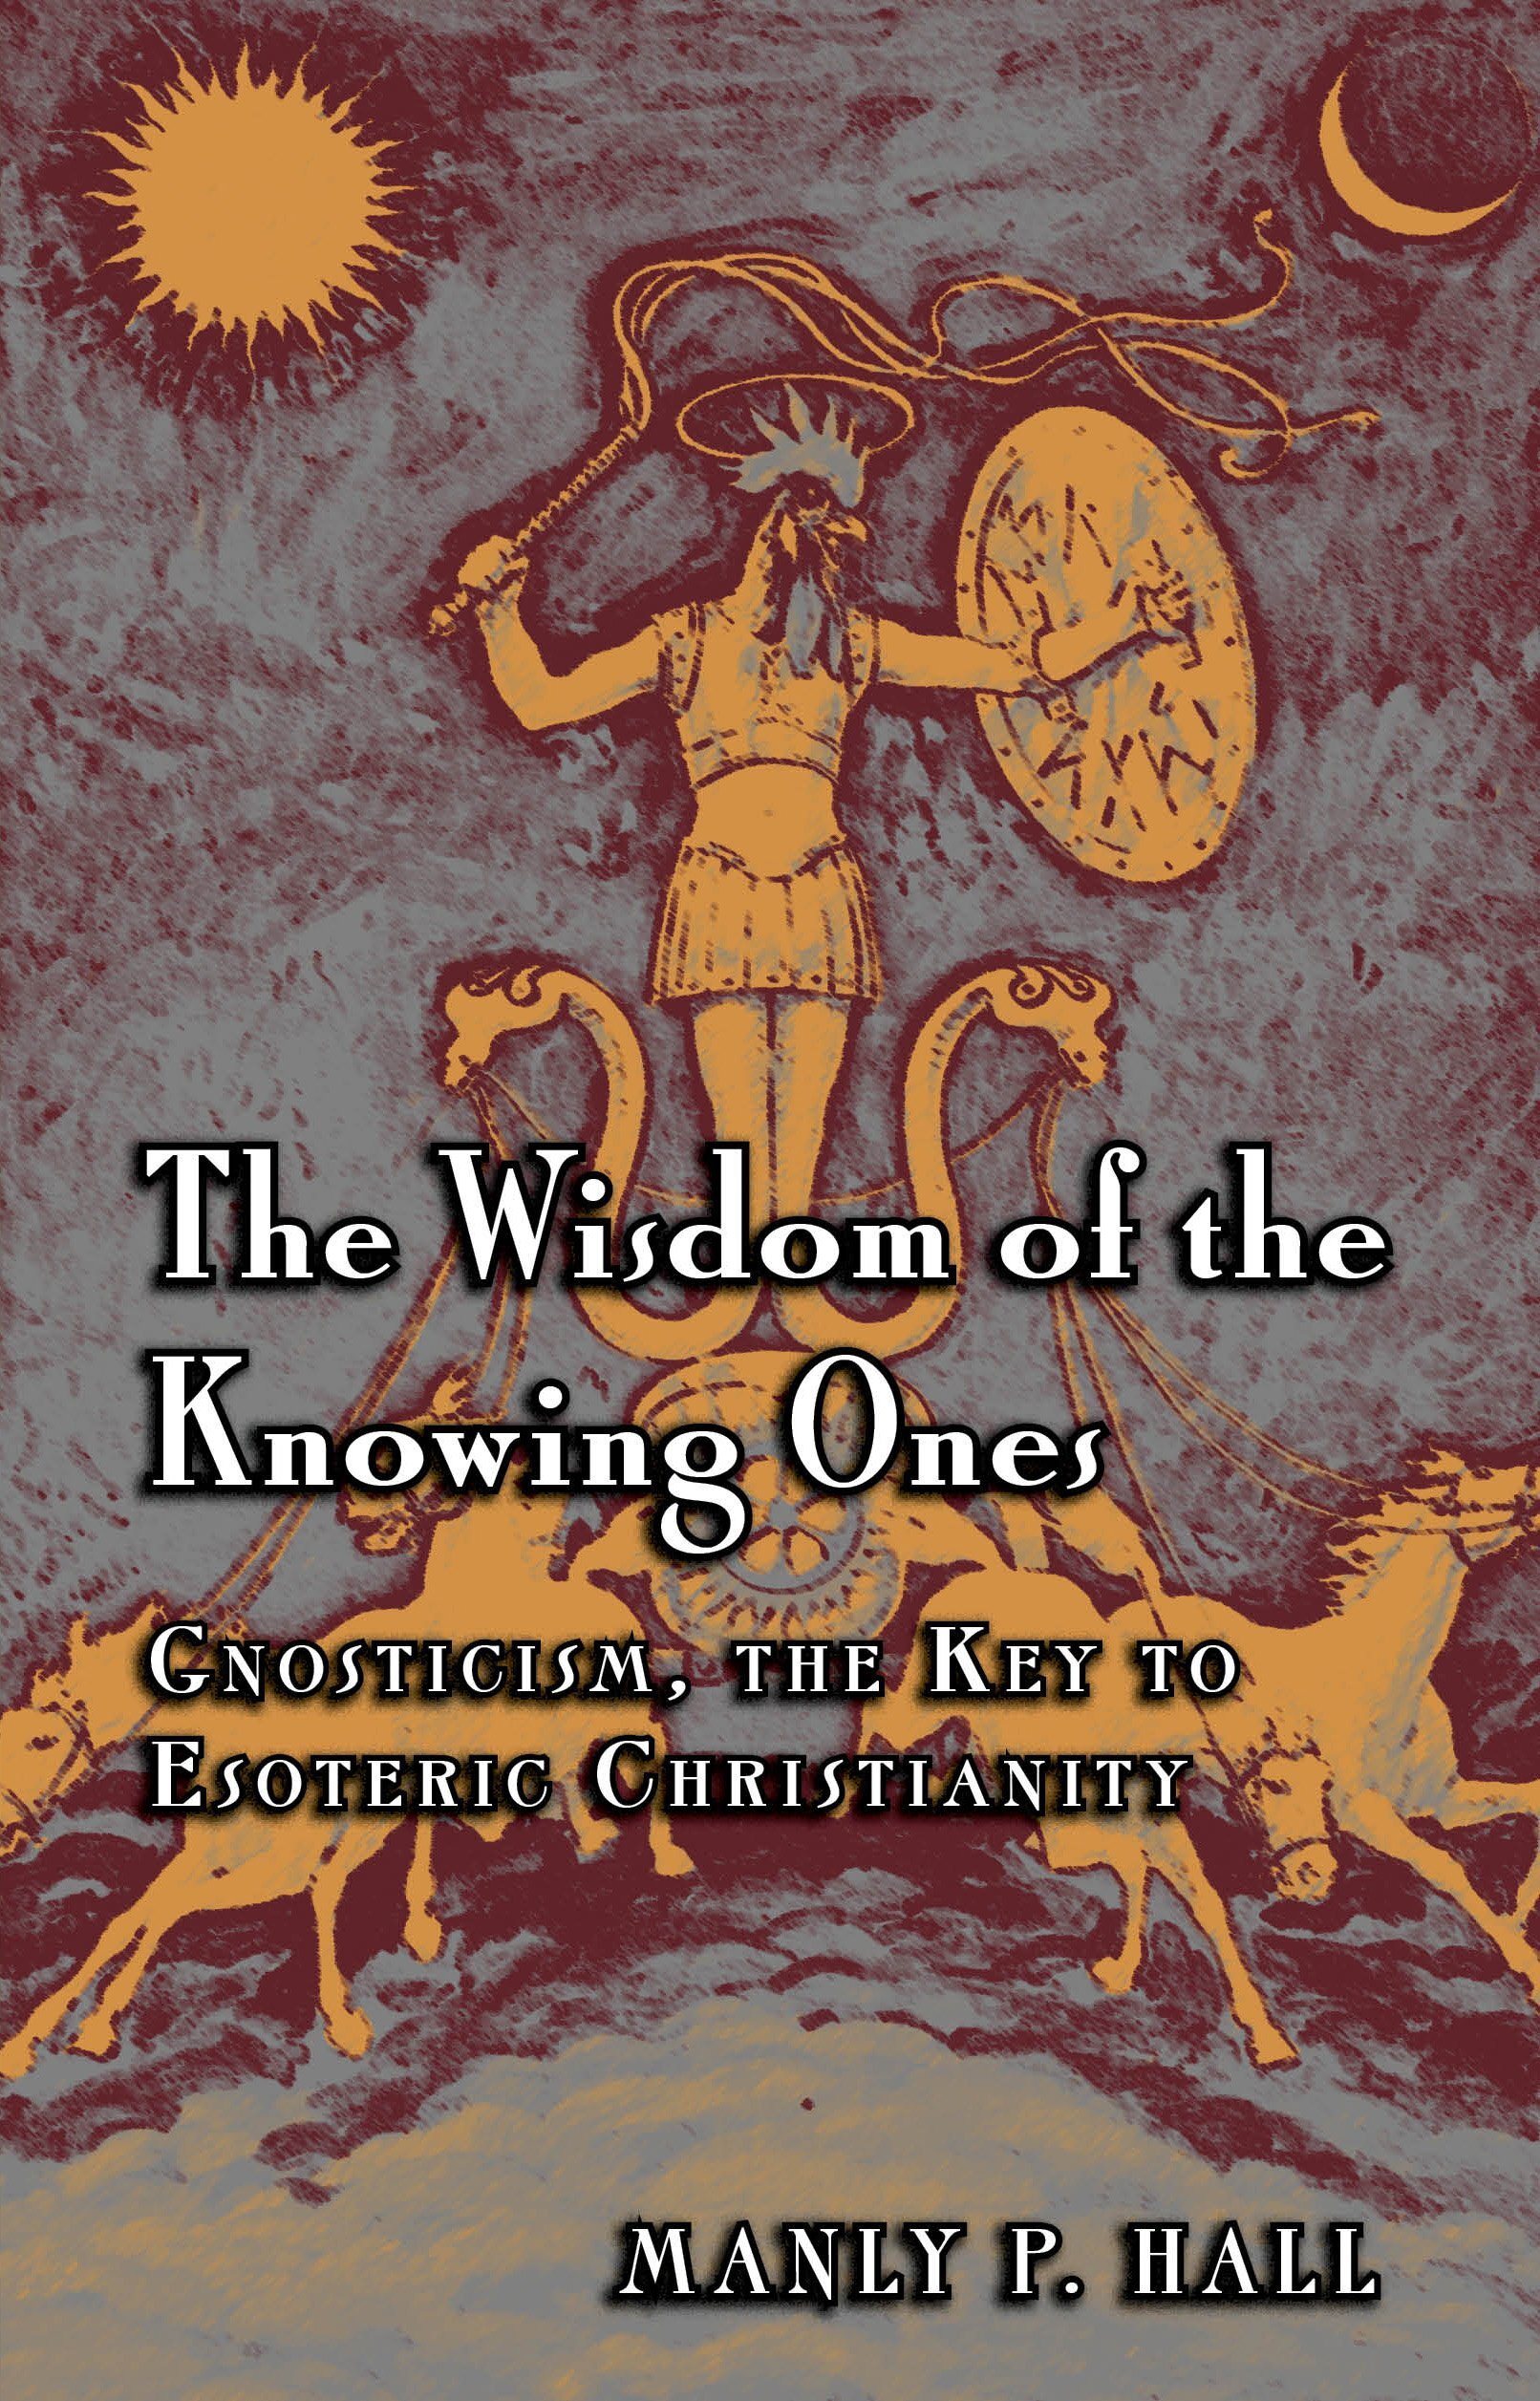 The Wisdom of the Knowing Ones: Gnosticism the Key to Esoteric Christianity